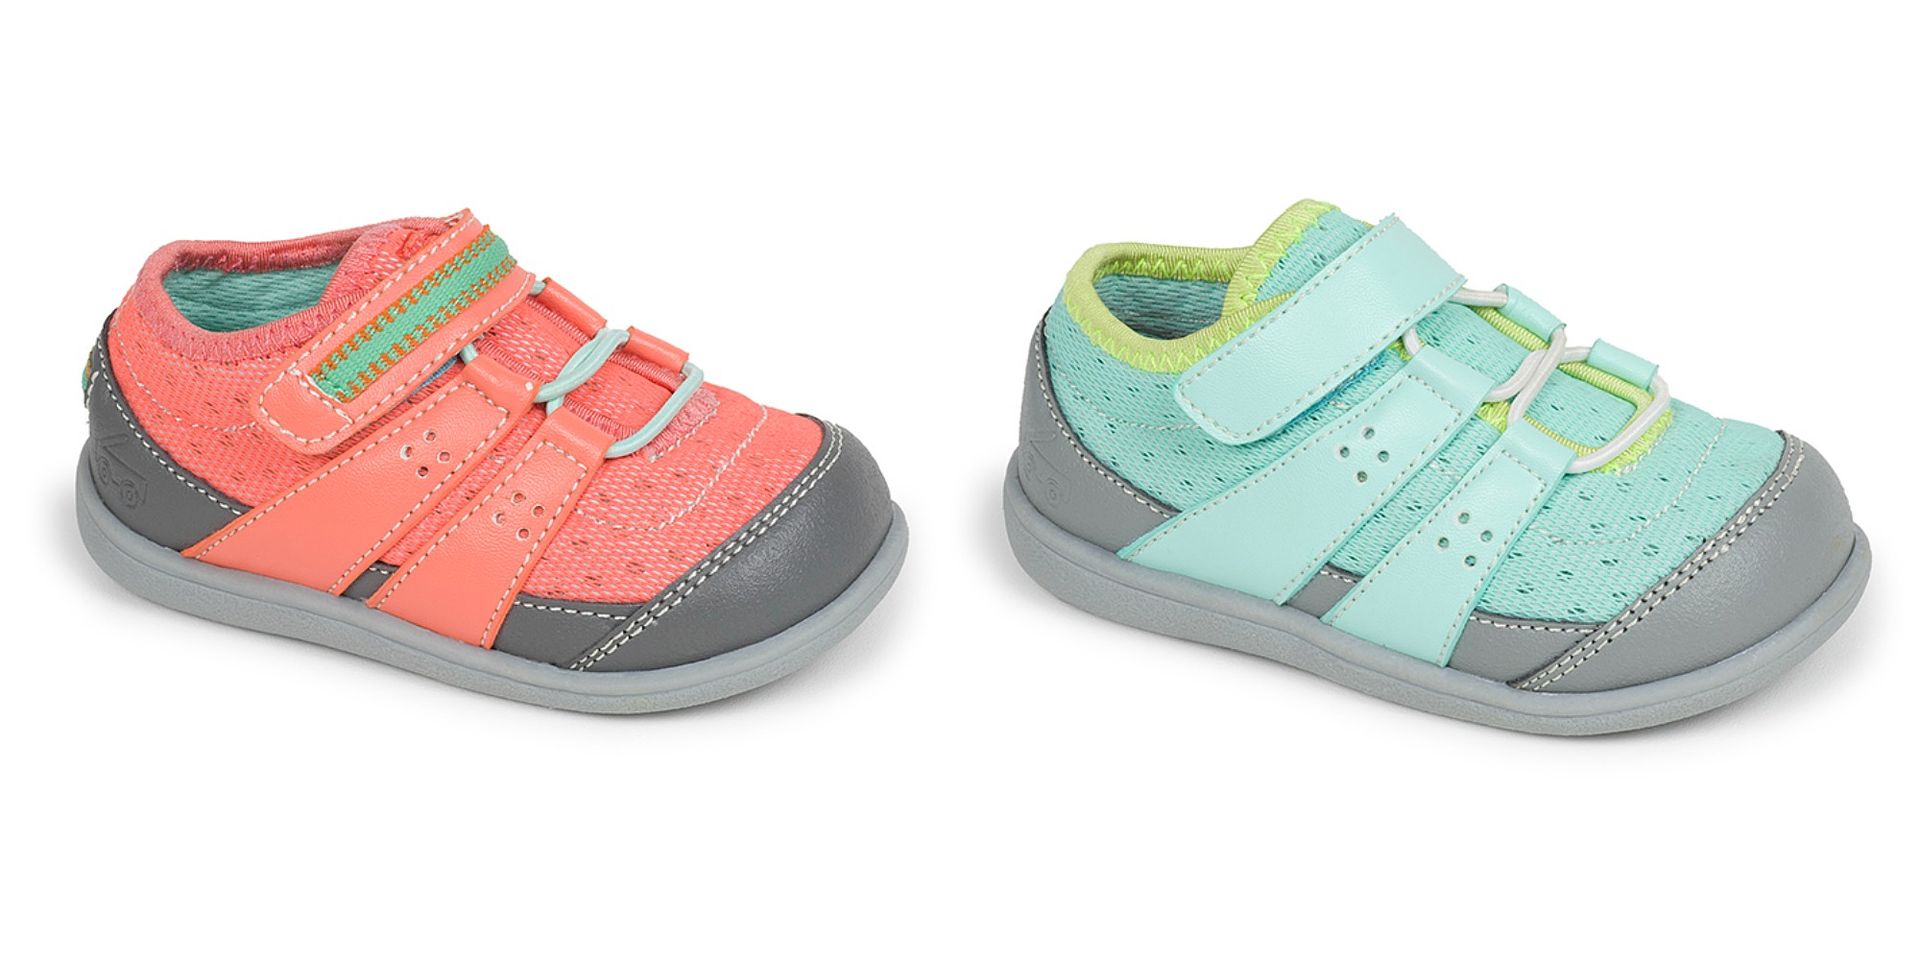 Cool water shoes for kids: See Kai Run's Ranier water shoes for toddlers